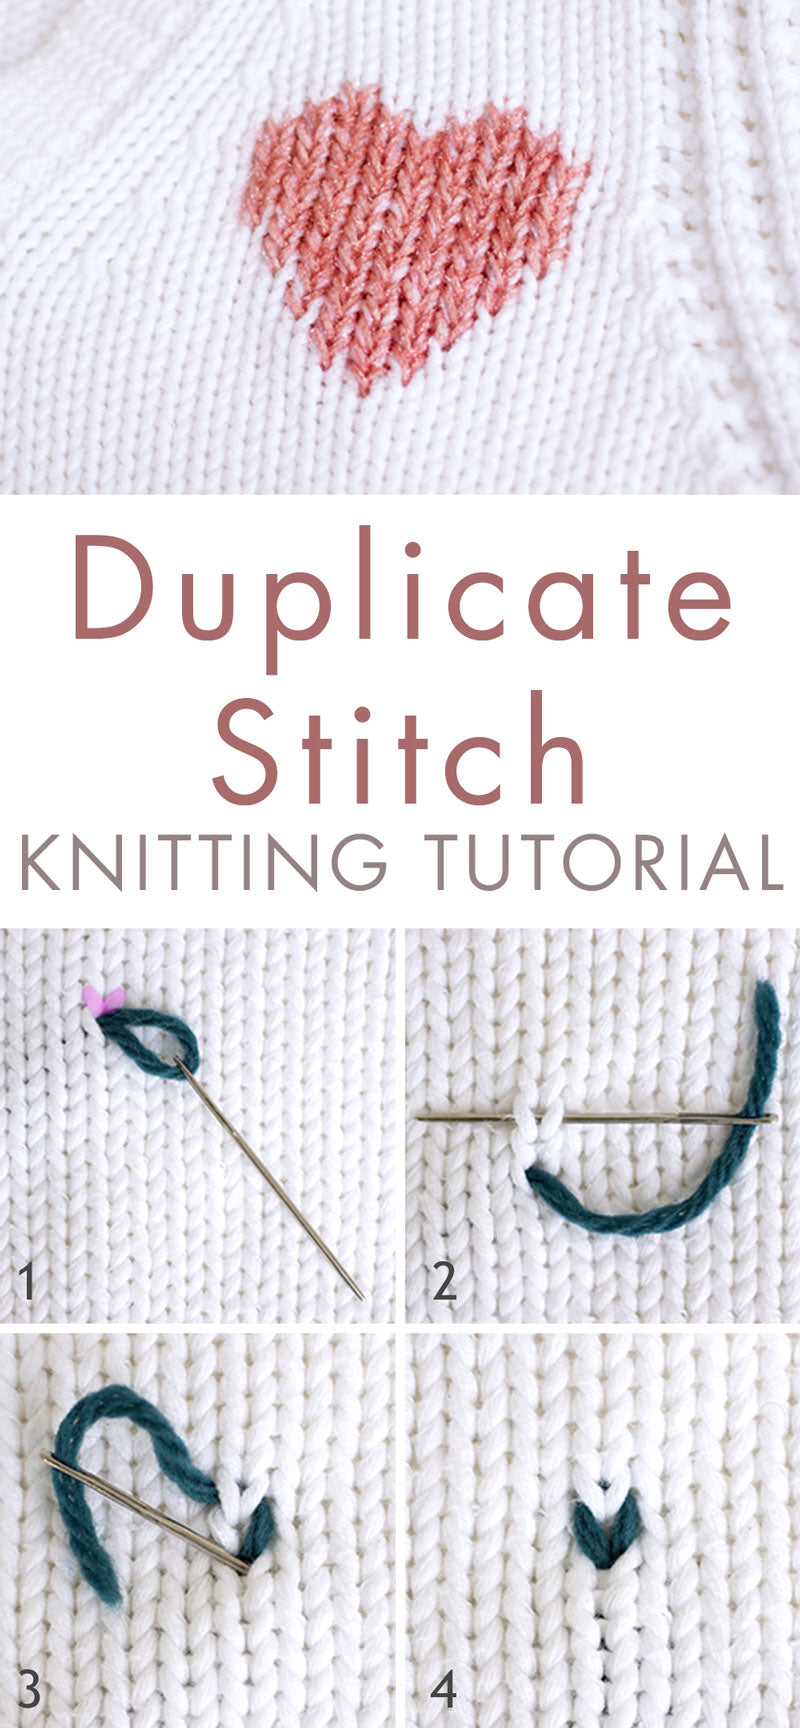 Duplicate stitch embroidery and knitting tutorial